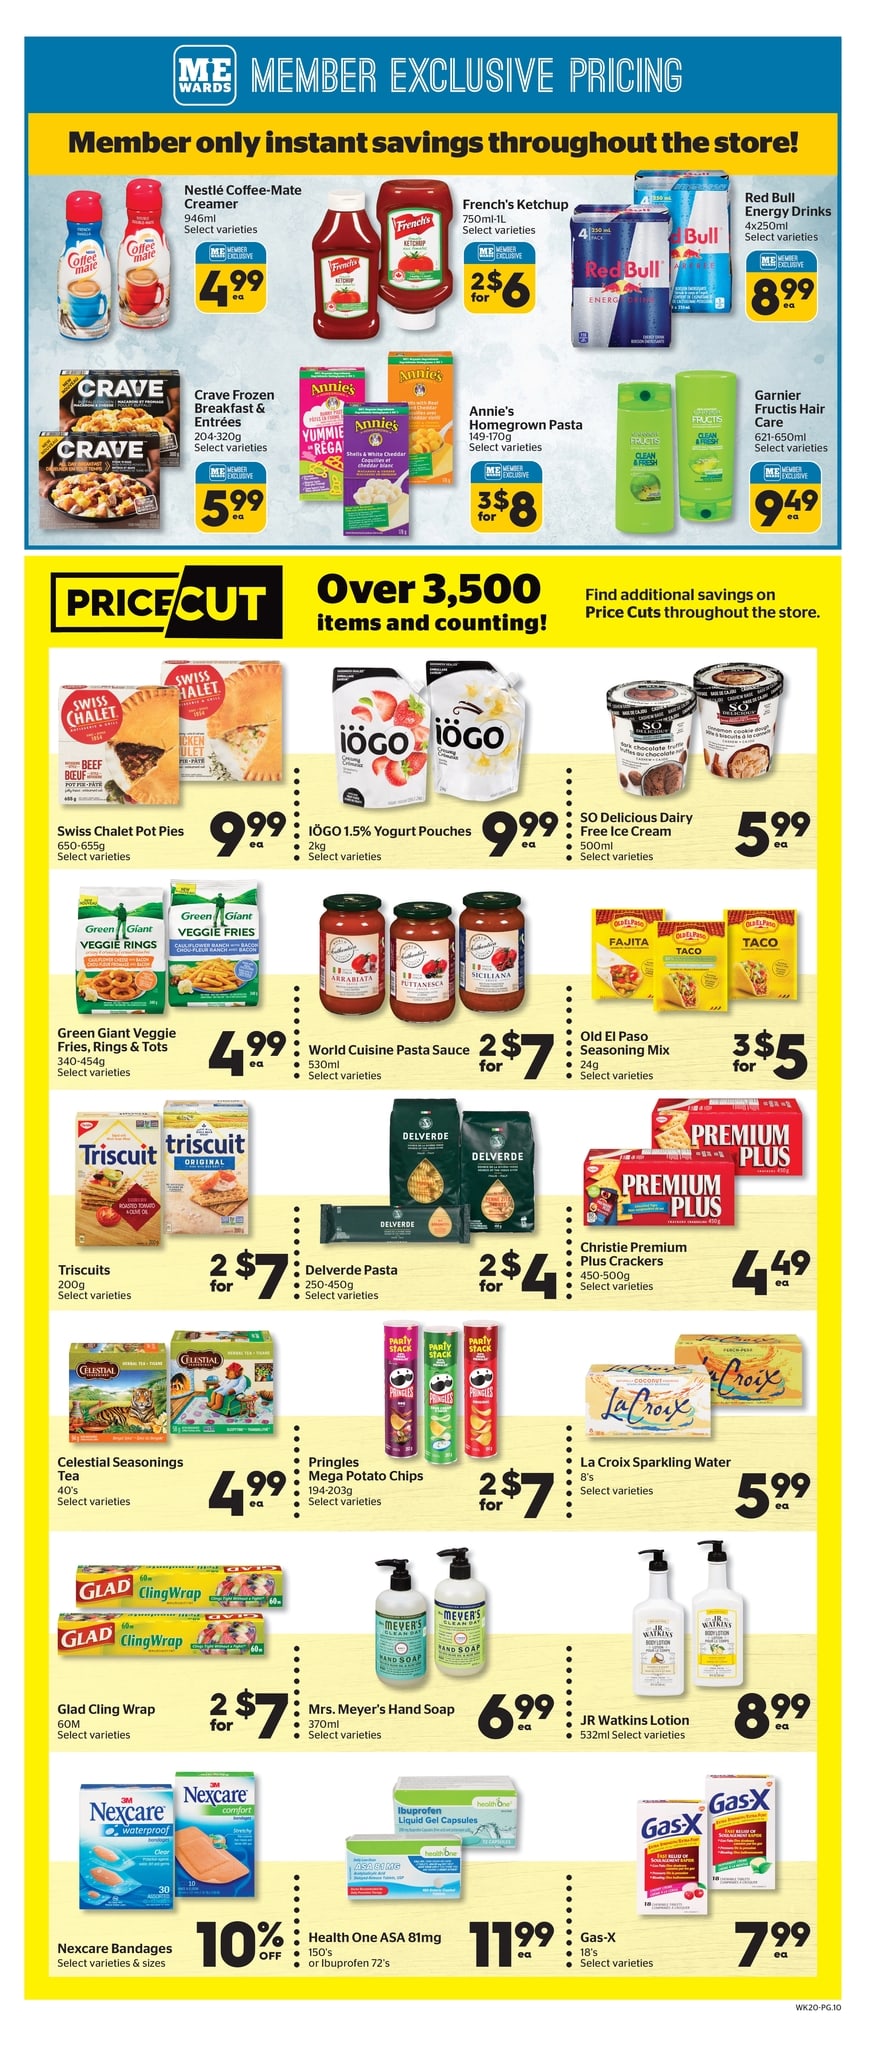 Calgary Co-op - Weekly Flyer Specials - Page 12